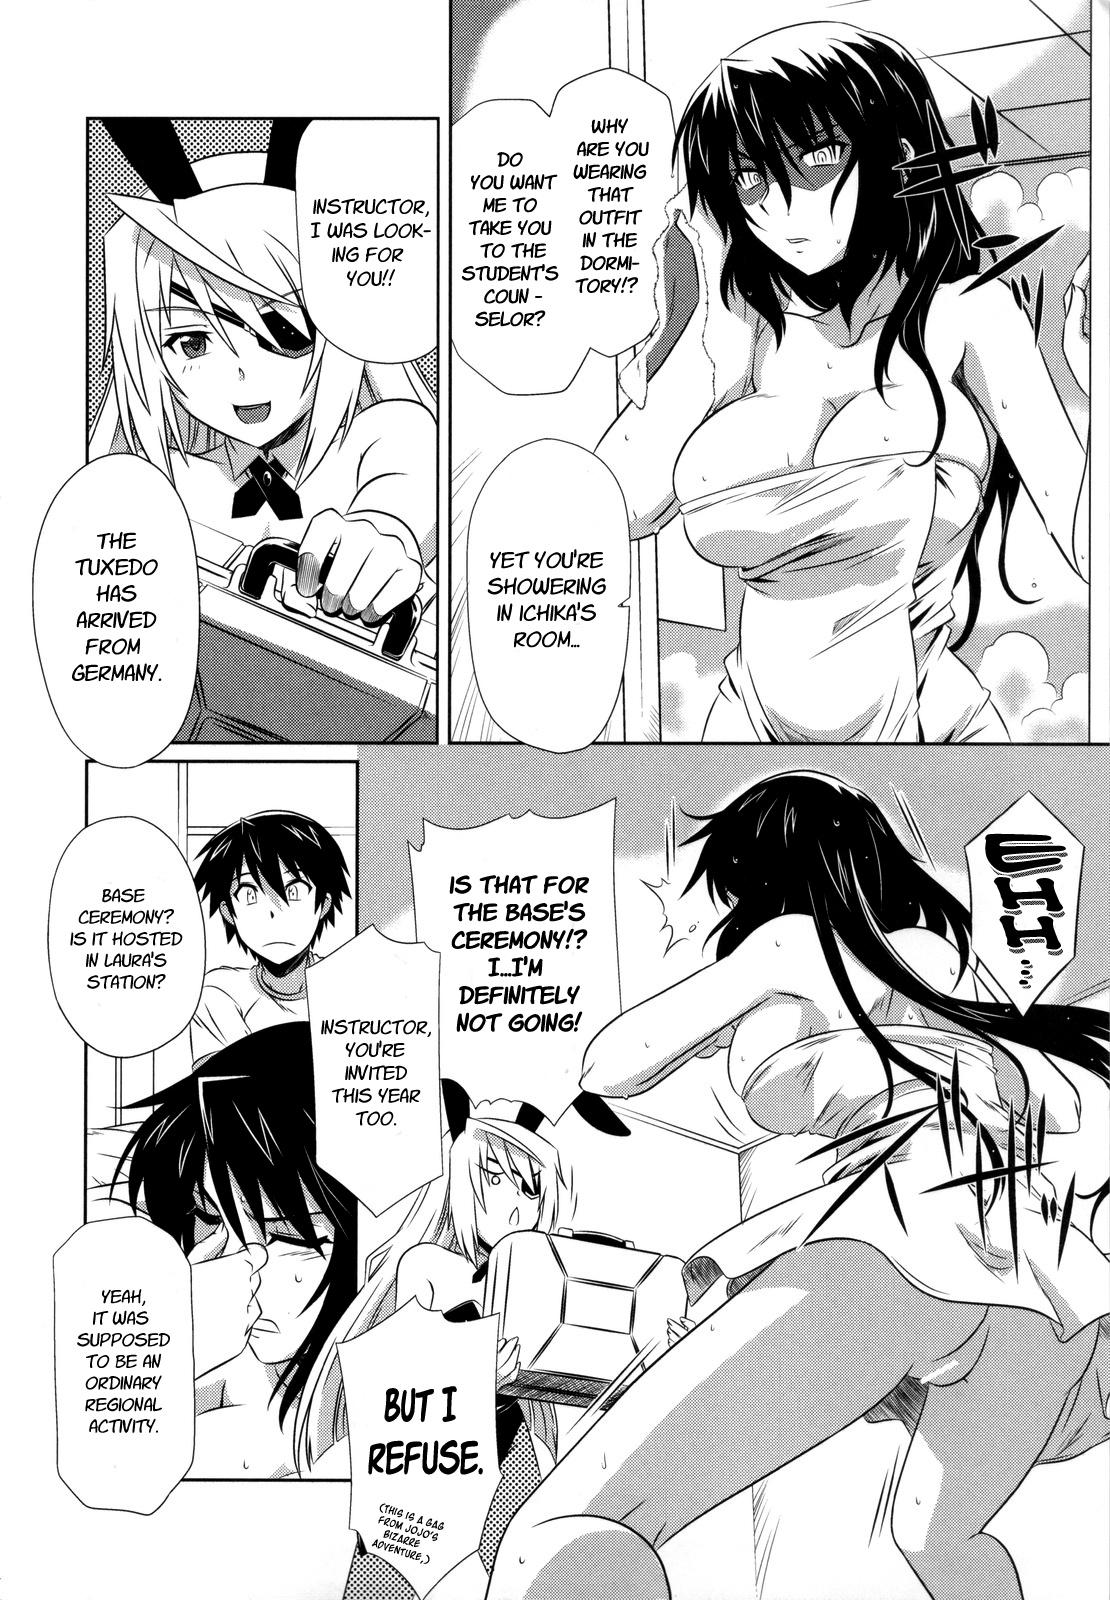 Whipping is Incest Strategy 3 - Infinite stratos Ass Sex - Page 3